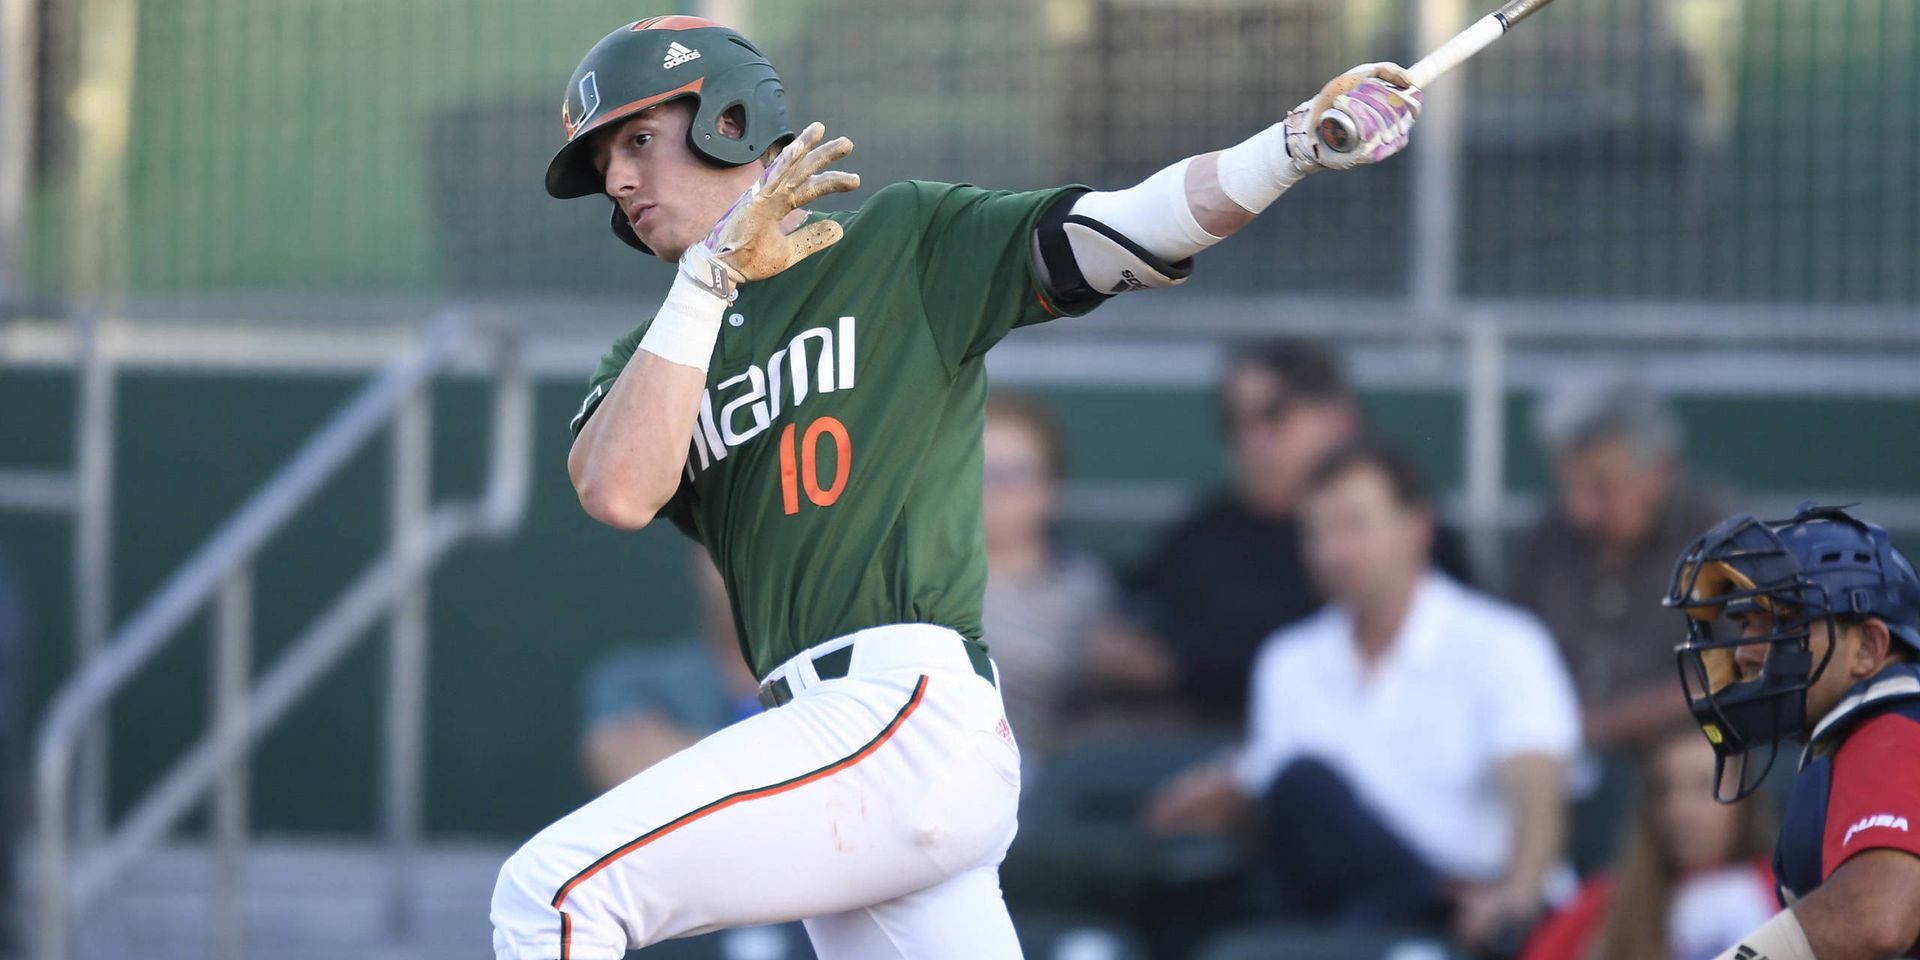 Miami Drops Game 1 of Doubleheader to Pitt